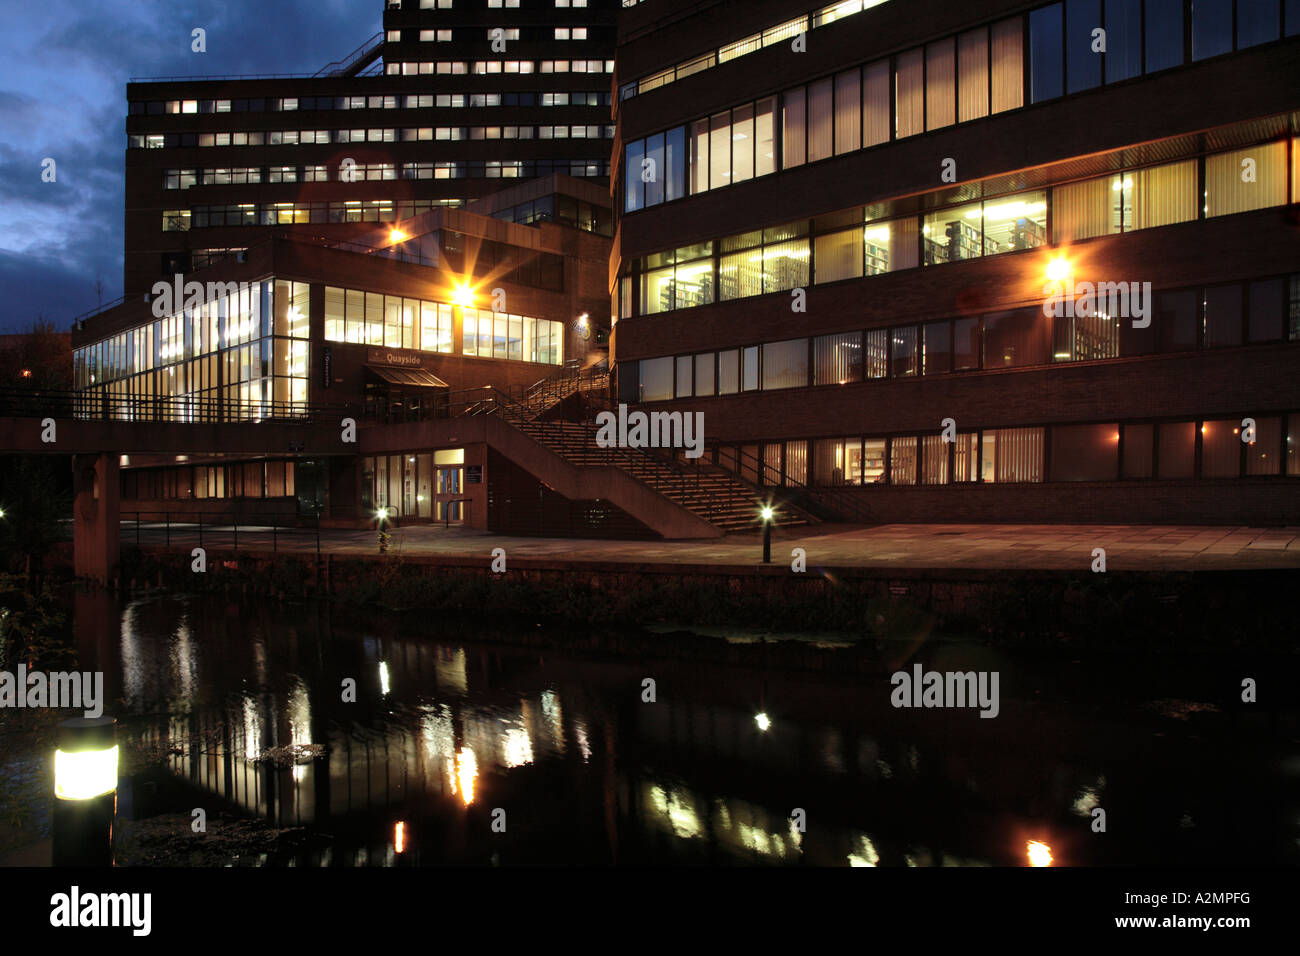 Quayside complex at night, University of Huddersfield, West Yorkshire, England, UK. Stock Photo